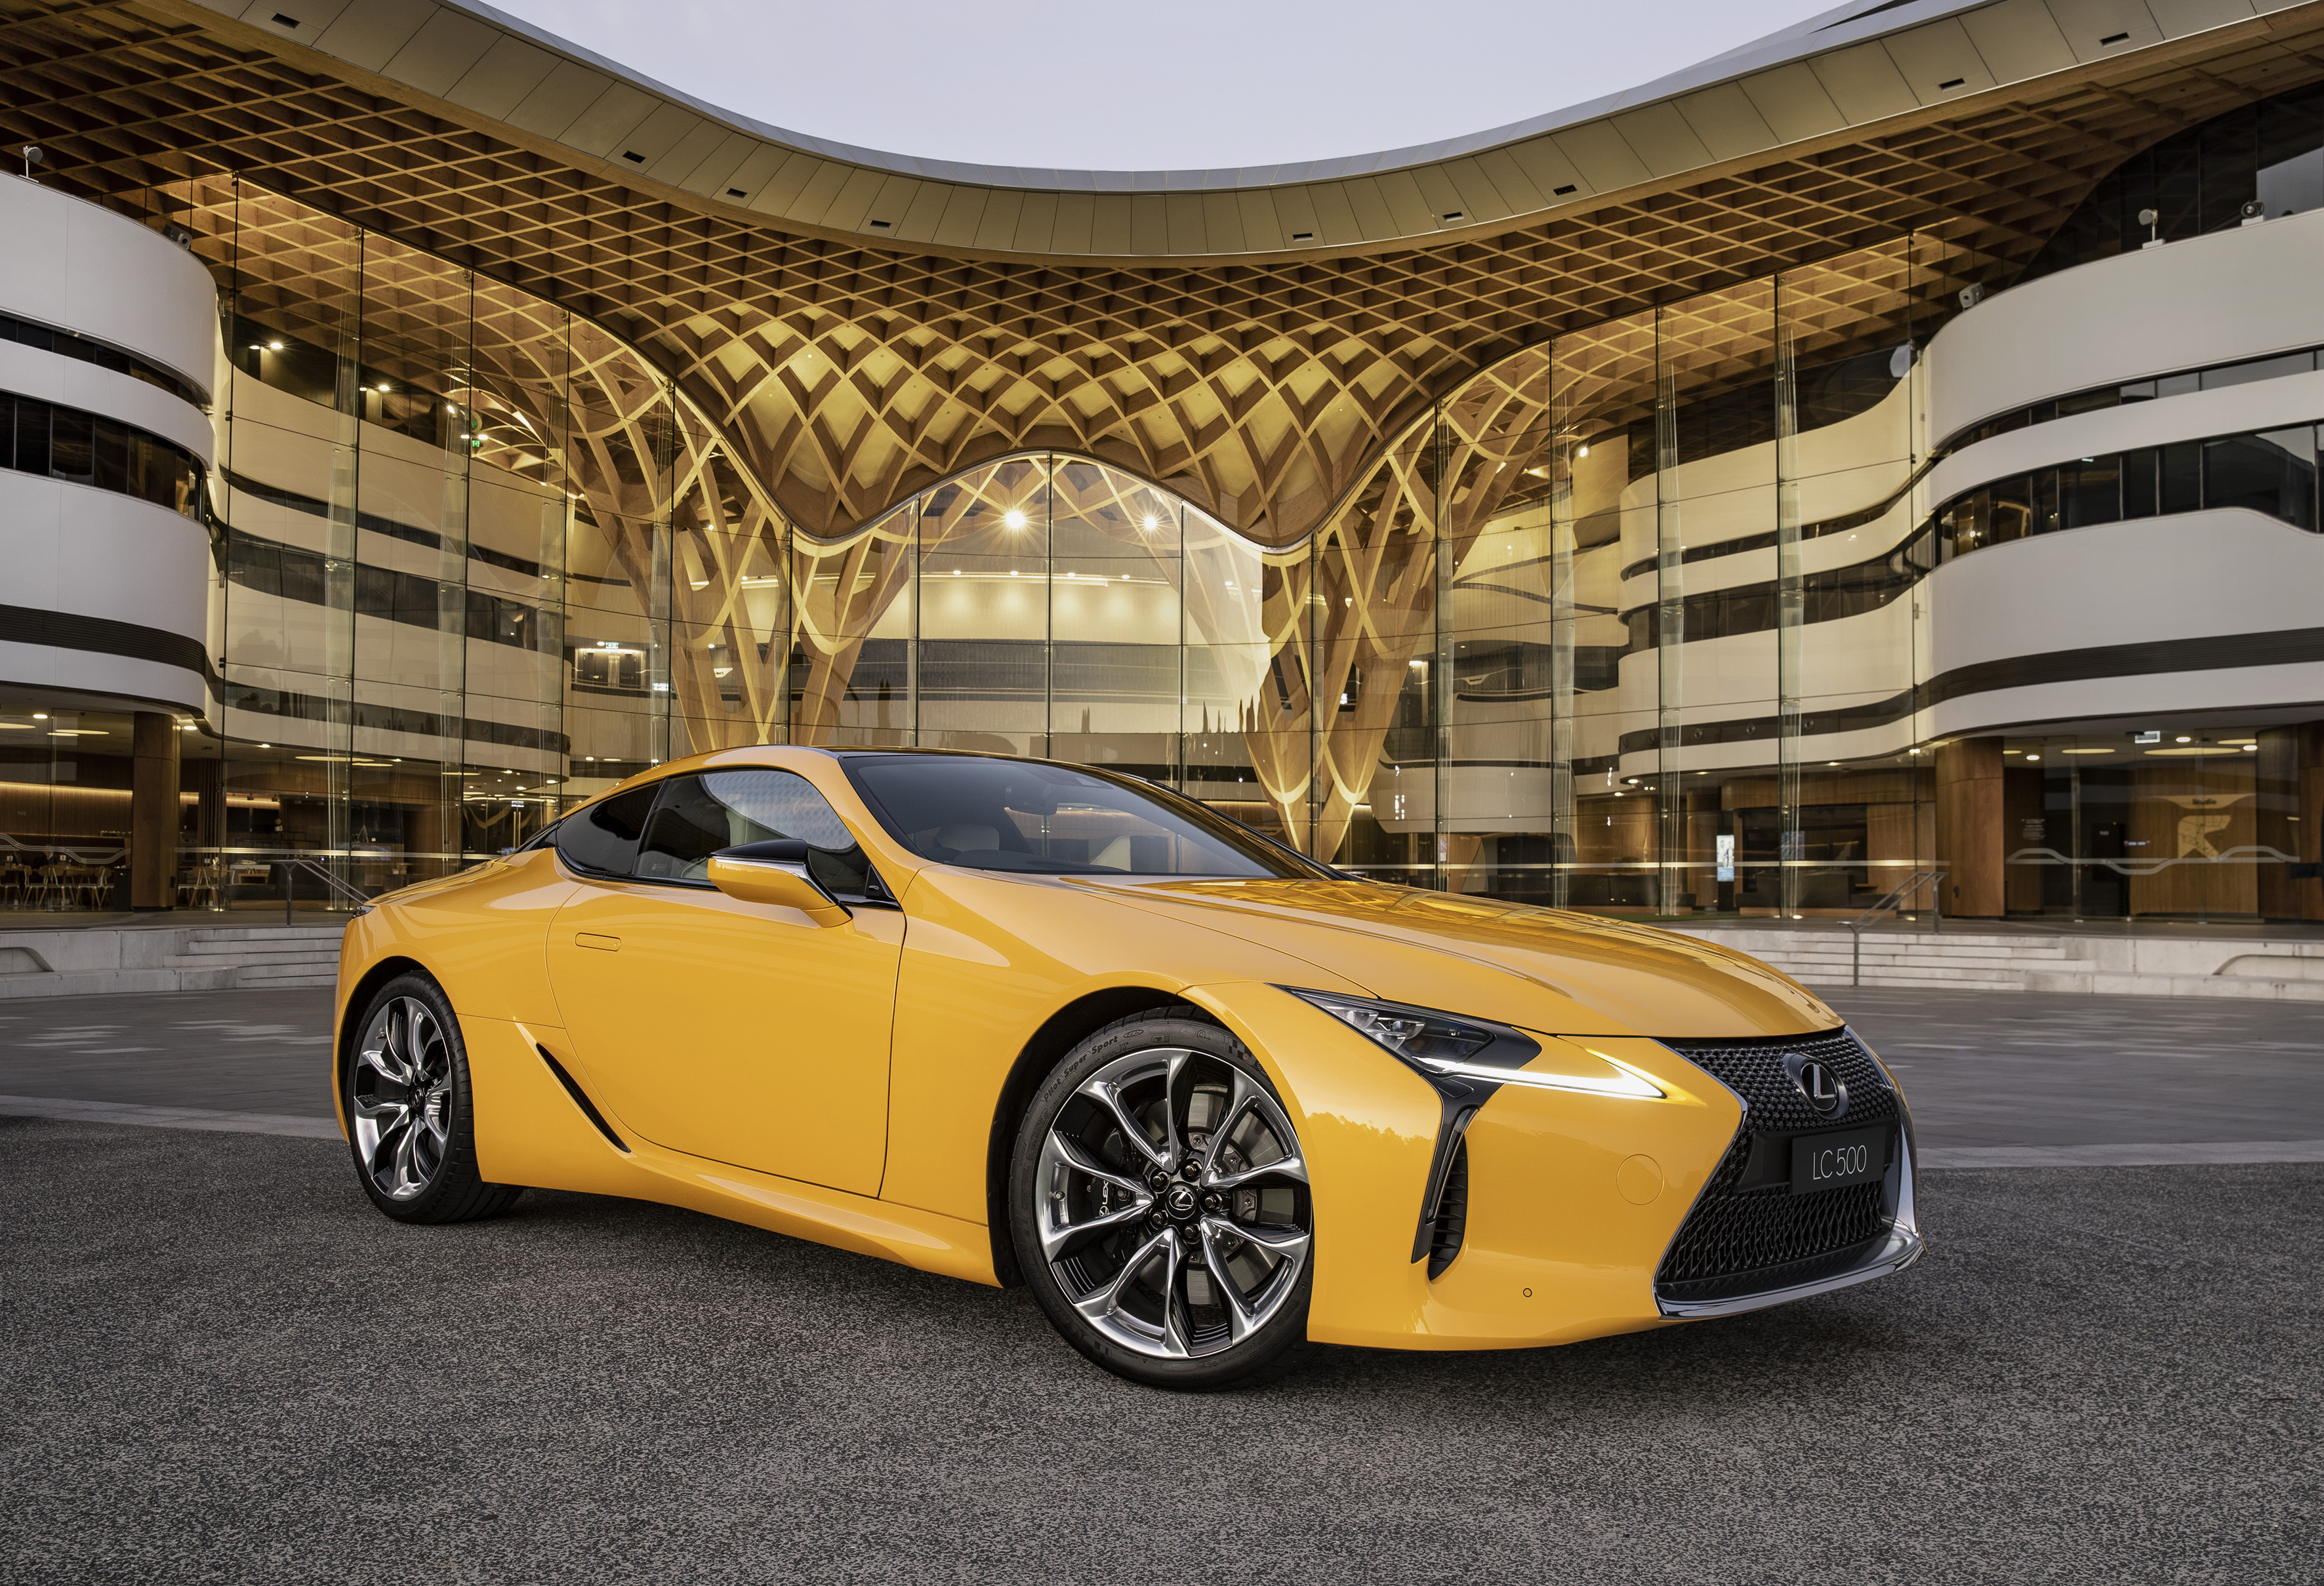 2018 Lexus Lc 500 Limited Edition Hd Wallpaper Background Image 3543x2418